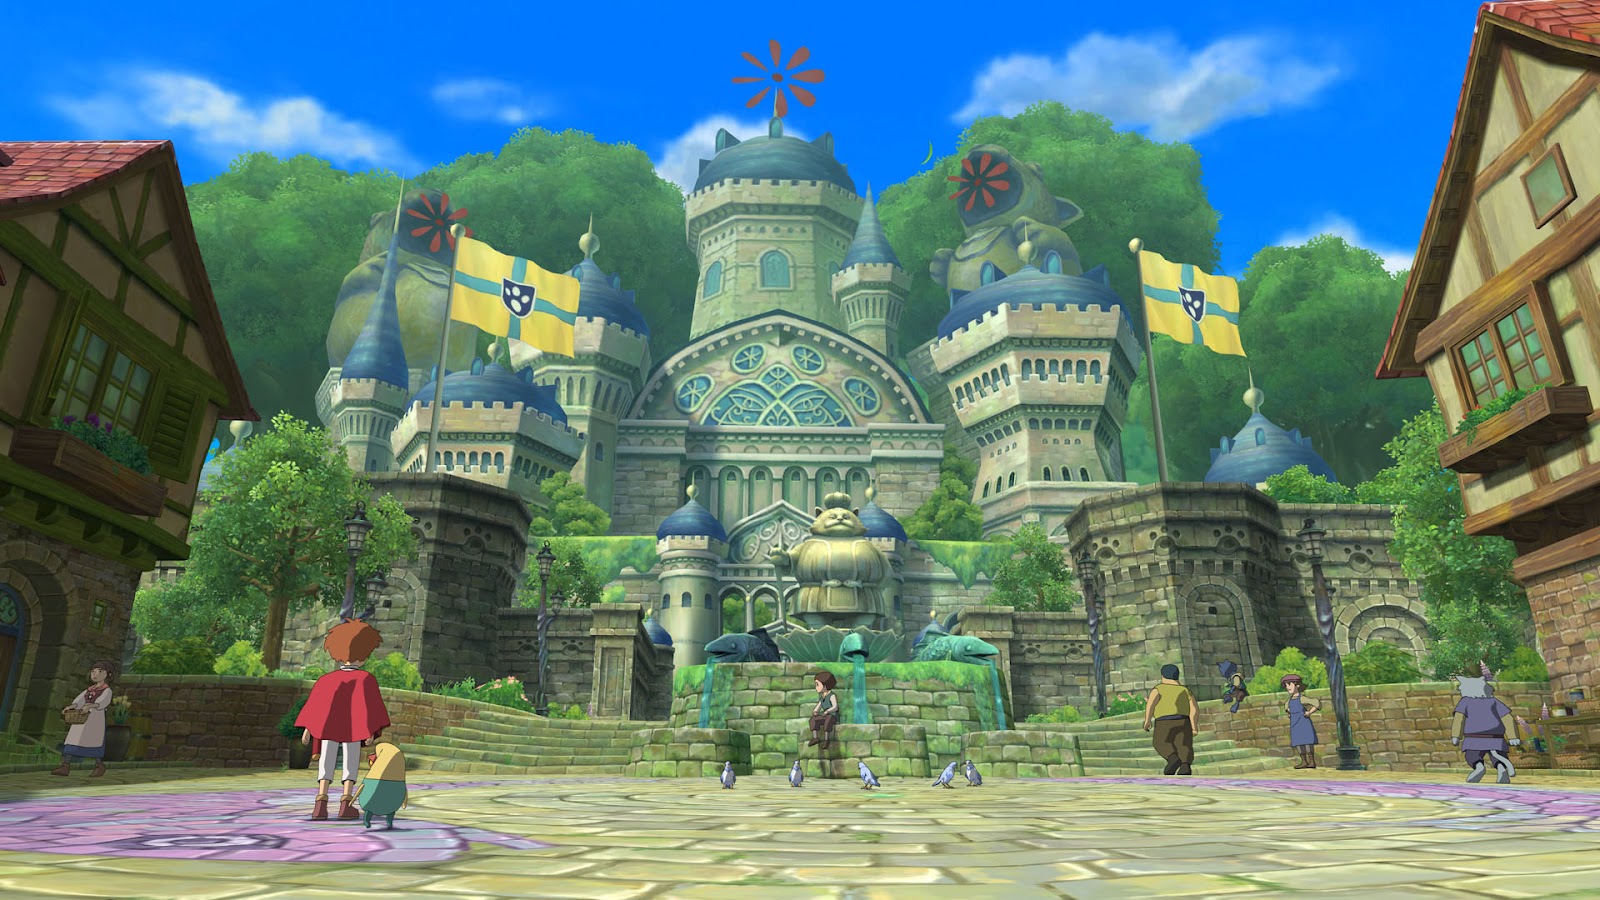 Level 5 Explains Why The Fantastic Ni No Kuni For Nintendo DS Won't Come To  West - My Nintendo News